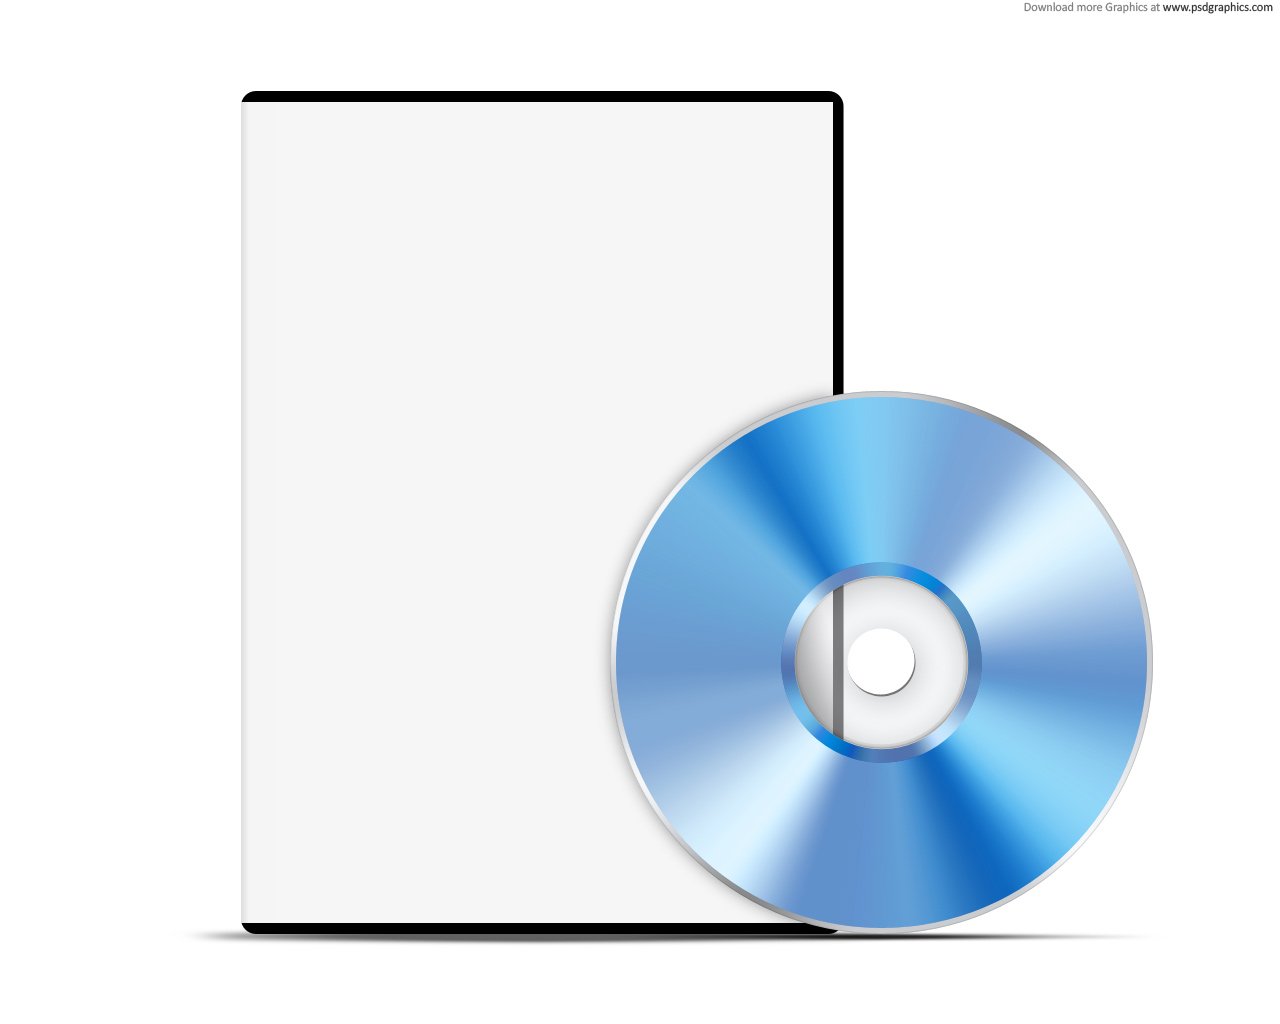 Skibform Squeak aflevere Blank white case with DVD, PSD web template | PSDgraphics